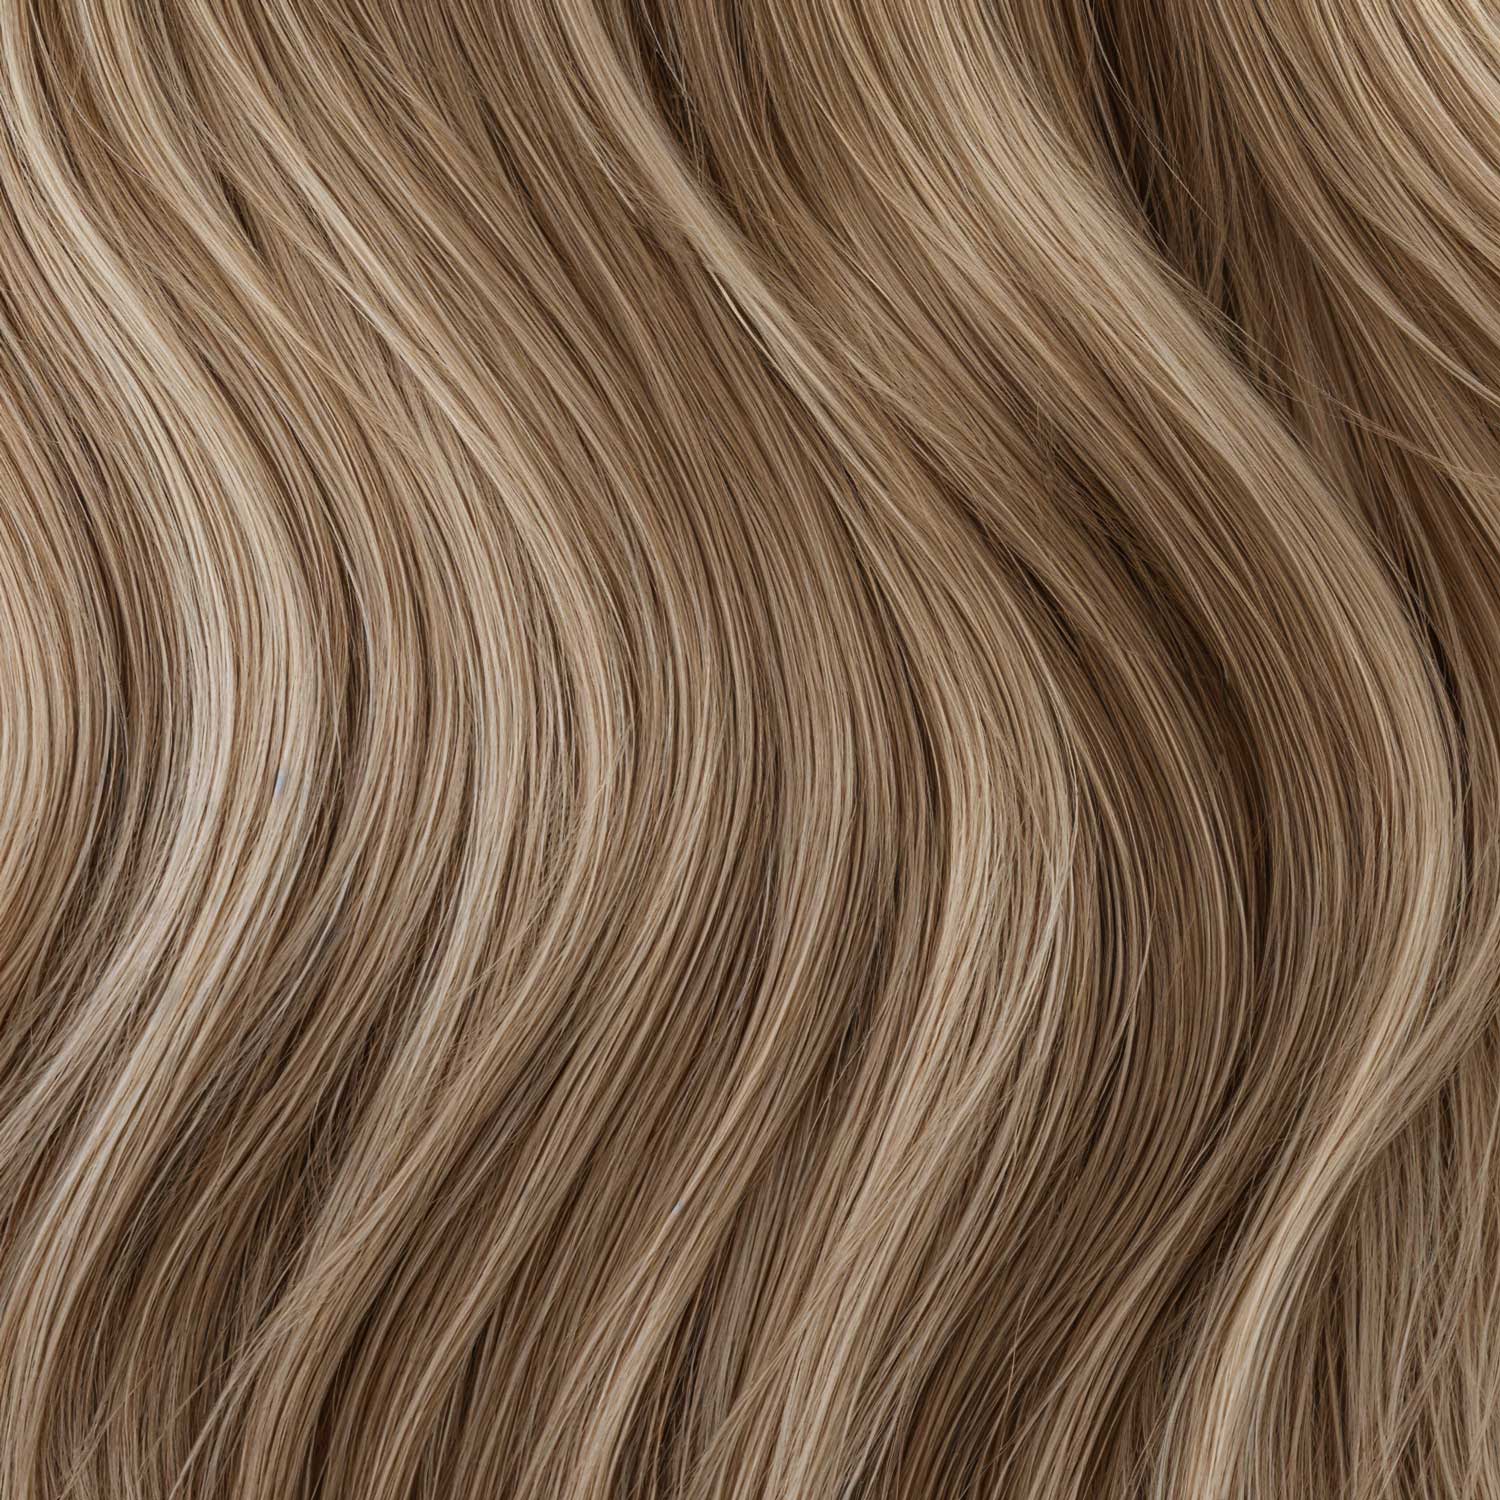 Natural Human Hair Extensions Highlights, made with quality hair extensions